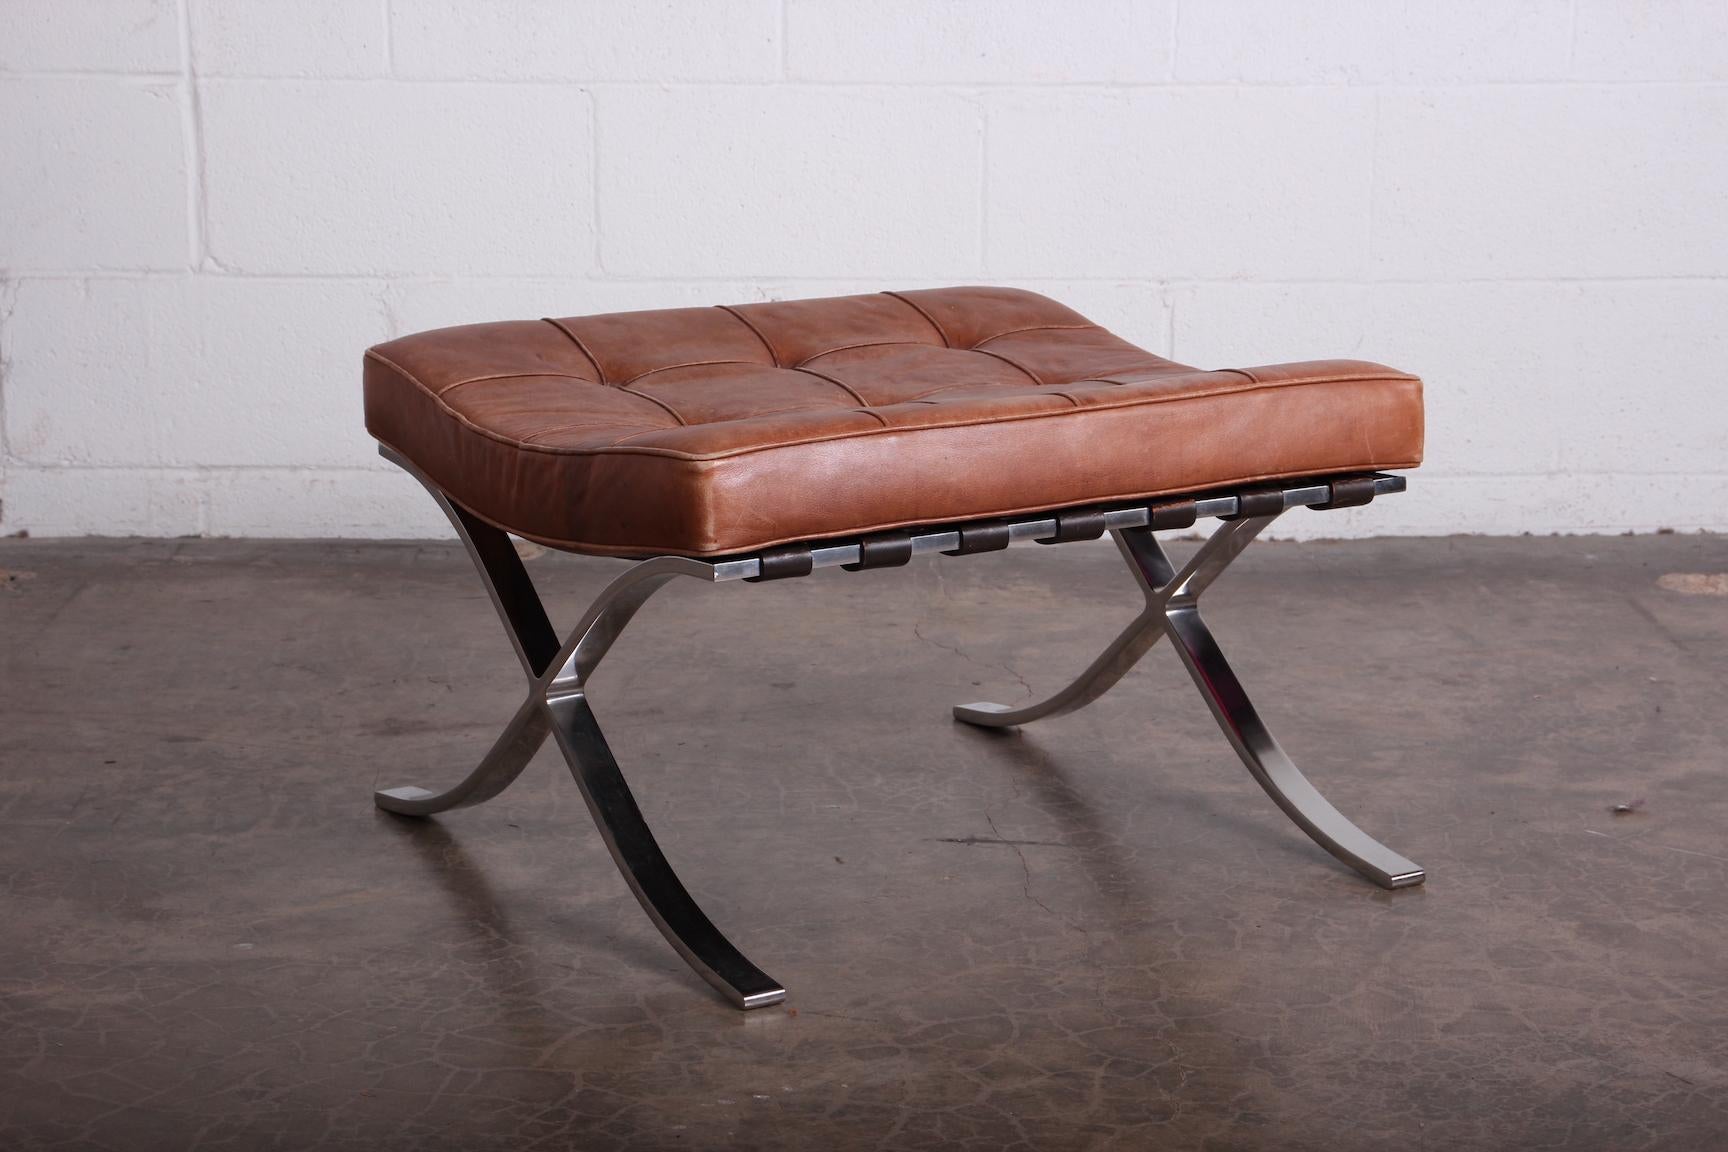 A beautifully patinated leather Barcelona stool designed by Mies van der Rohe for Knoll.